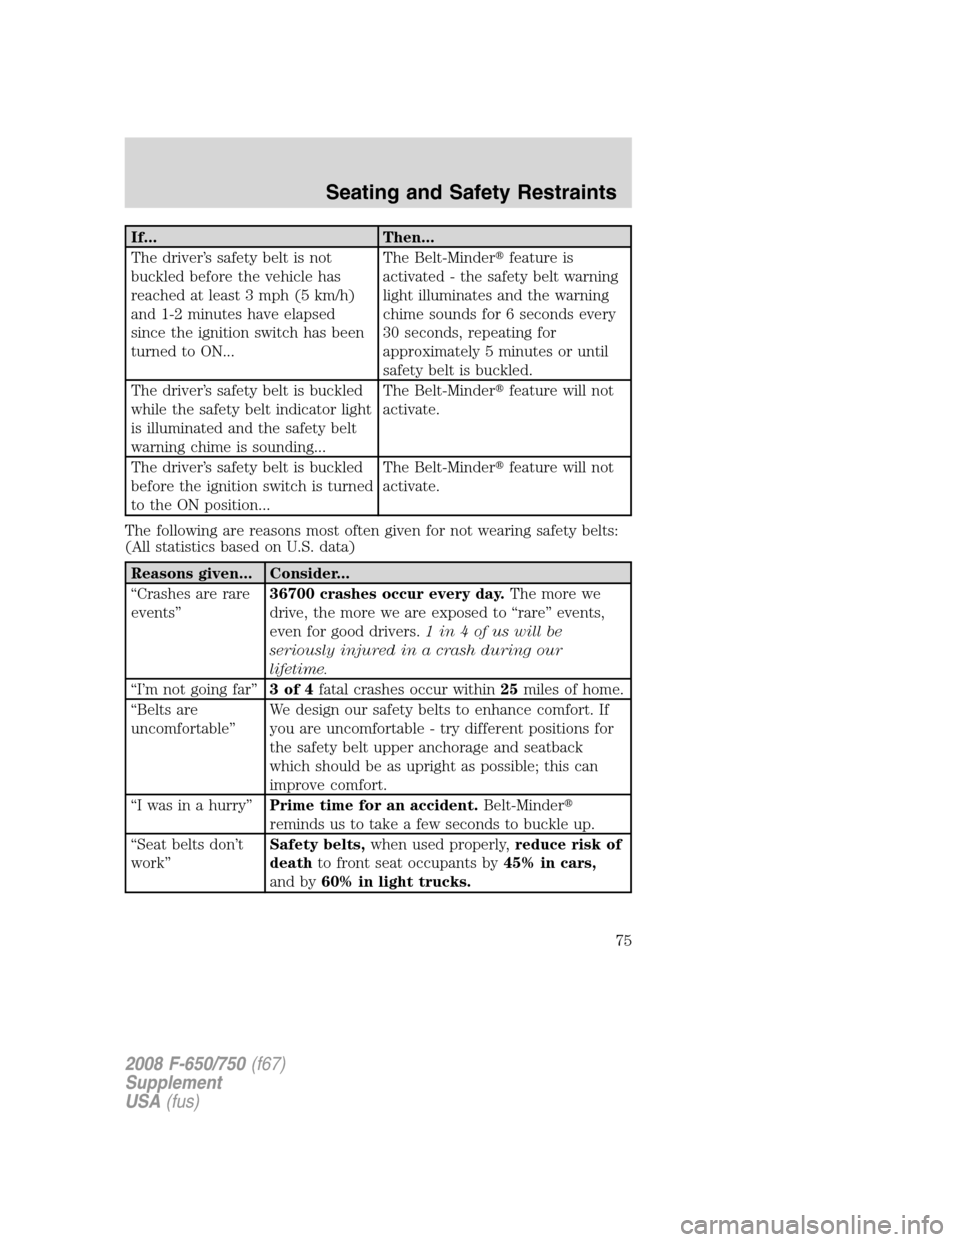 FORD F750 2008 11.G Owners Manual If... Then...
The driver’s safety belt is not
buckled before the vehicle has
reached at least 3 mph (5 km/h)
and 1-2 minutes have elapsed
since the ignition switch has been
turned to ON...The Belt-M